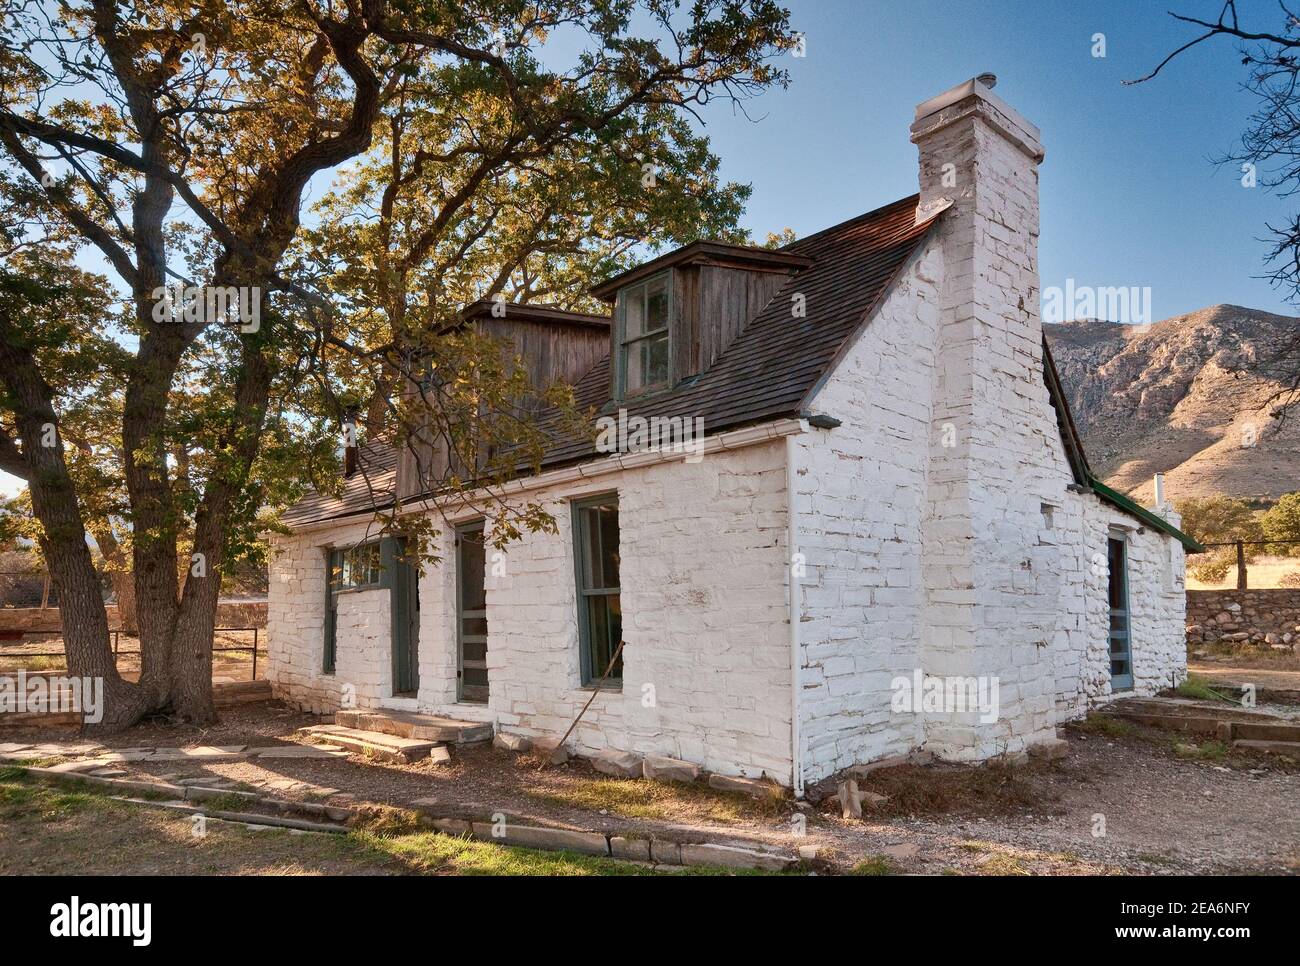 Frijole Ranch Geschichtsmuseum im Guadalupe Mountains National Park, Texas, USA Stockfoto